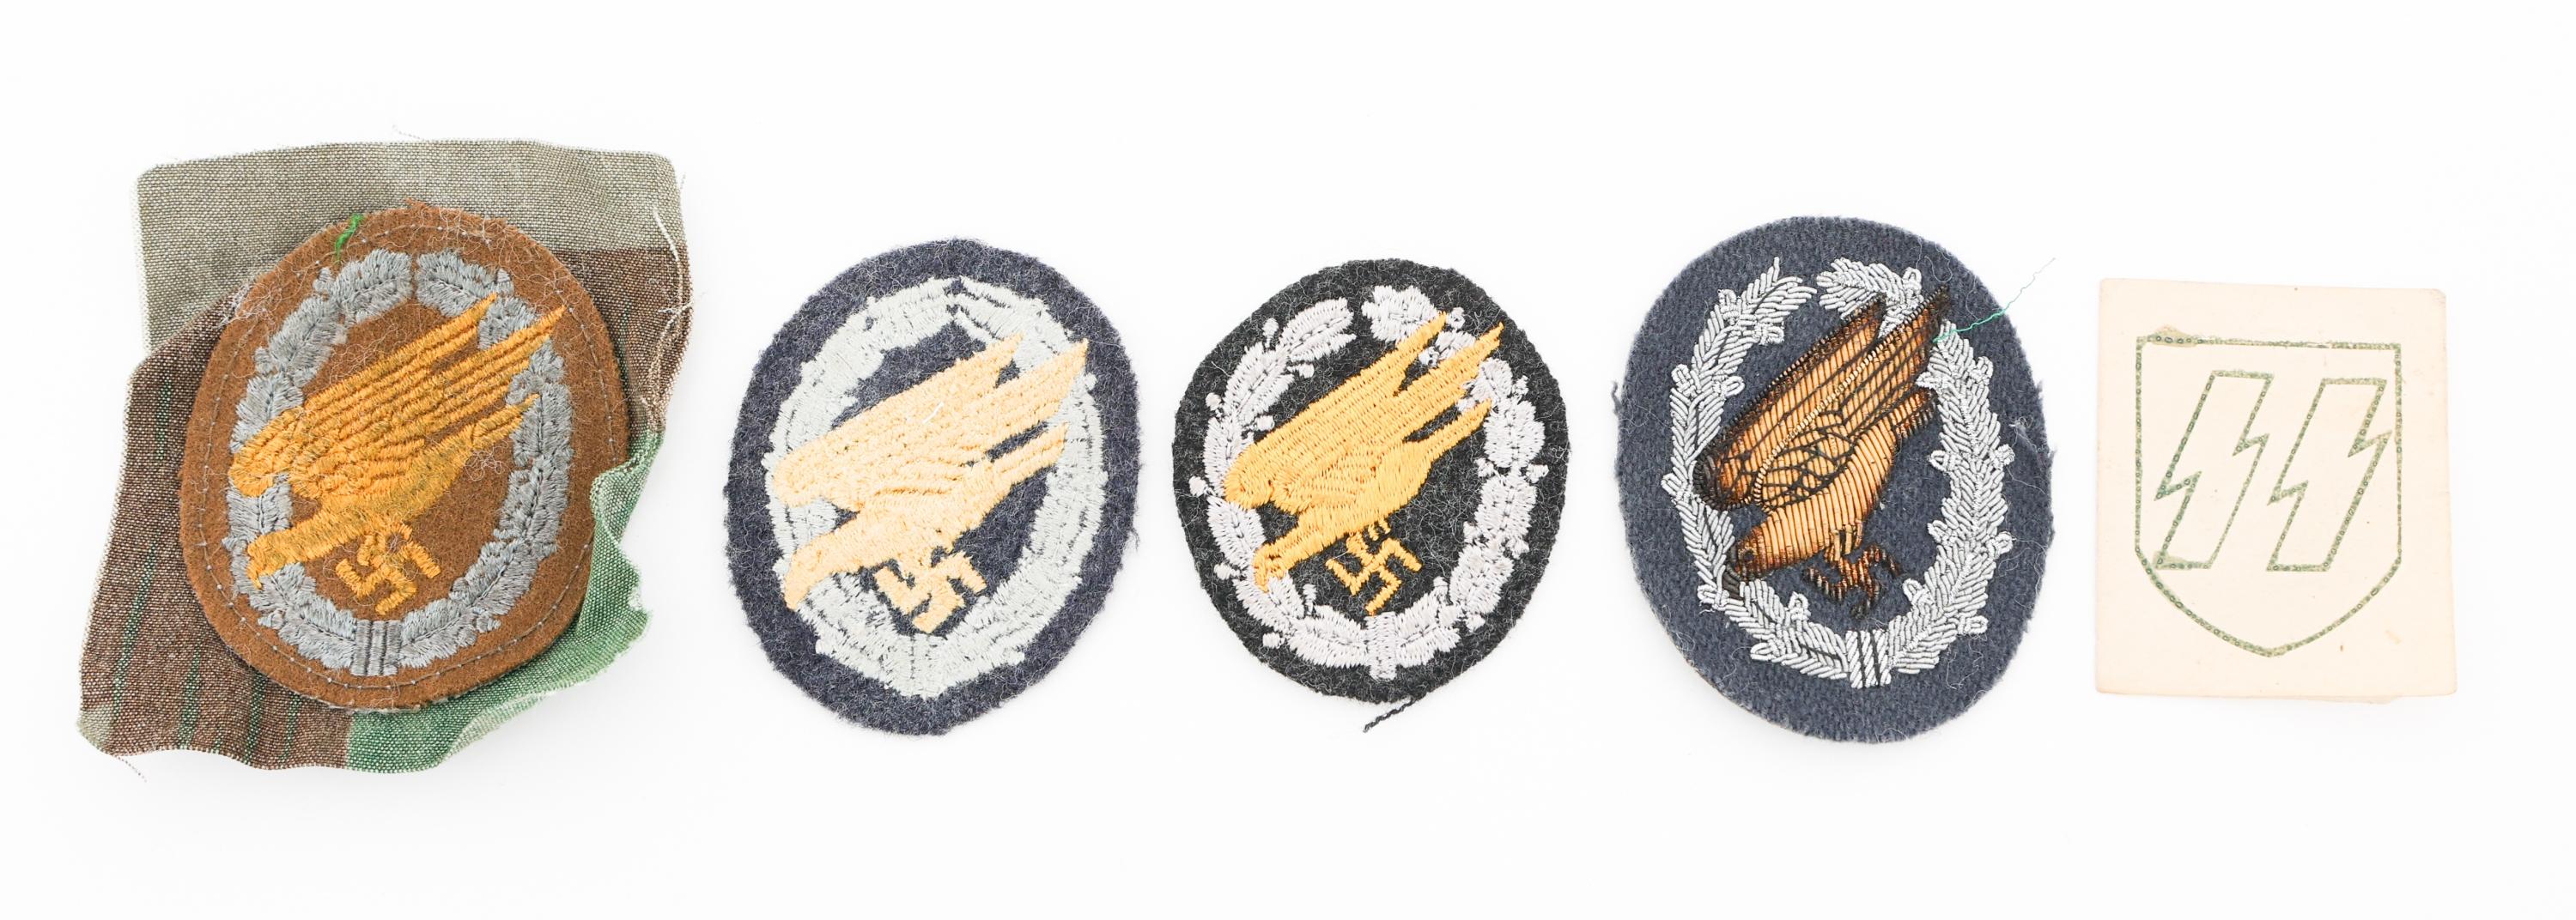 MODERN COPIES OF WWII GERMAN BADGES & CUFF TITLES